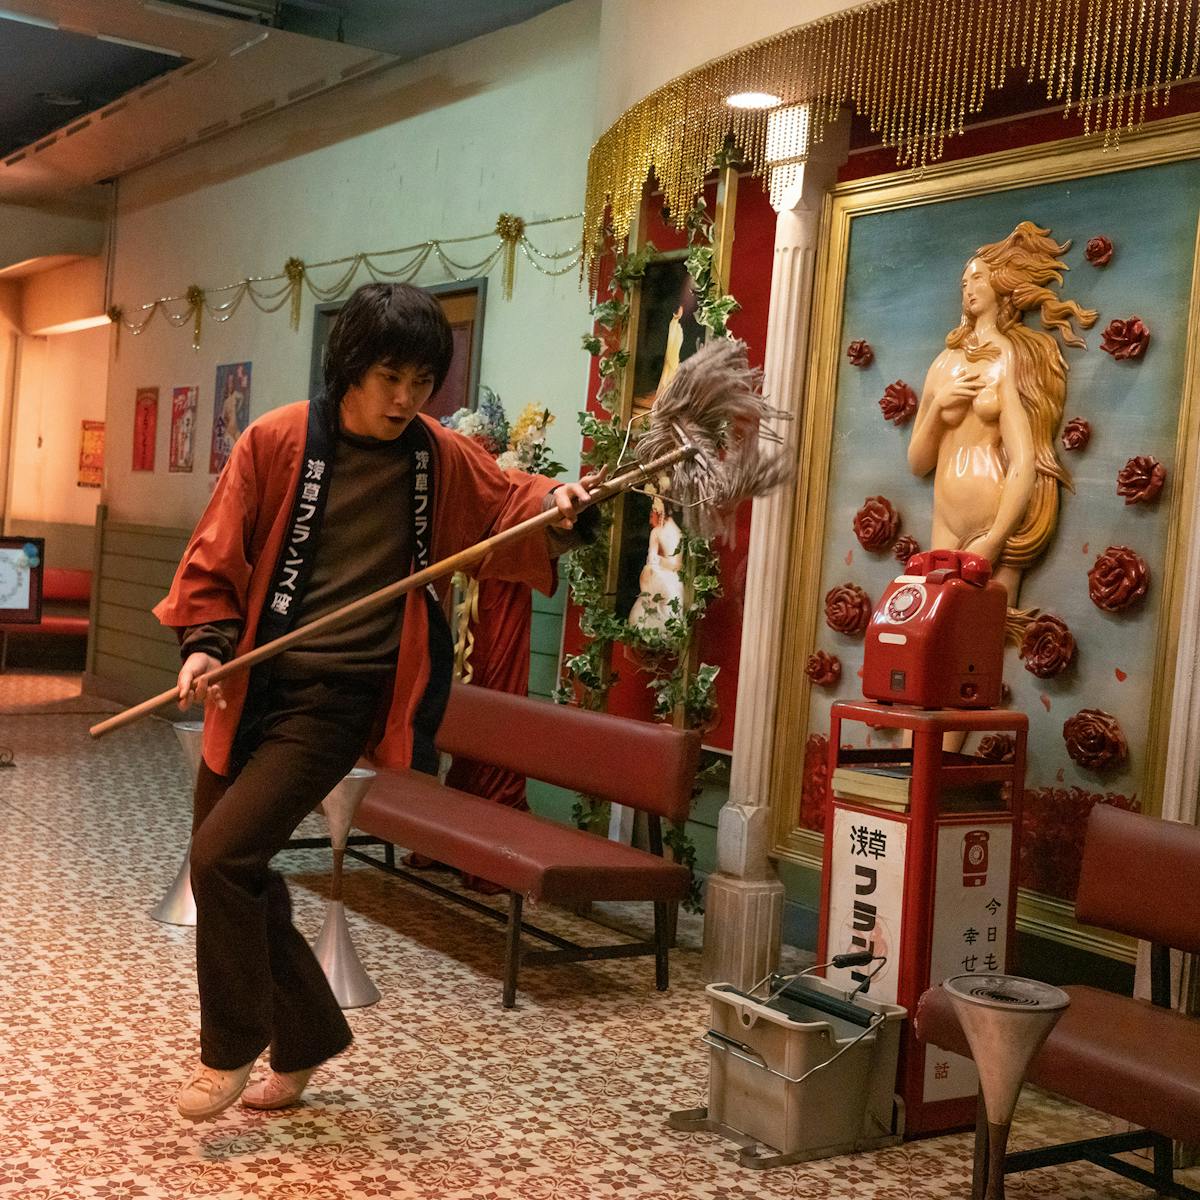 Yuya Yagira wears brown pants and shirt, a red rob, and carries a duster. He dances in the foyer of a house. There is a nude woman on the wall, a phone, and lots of knick-knacks.